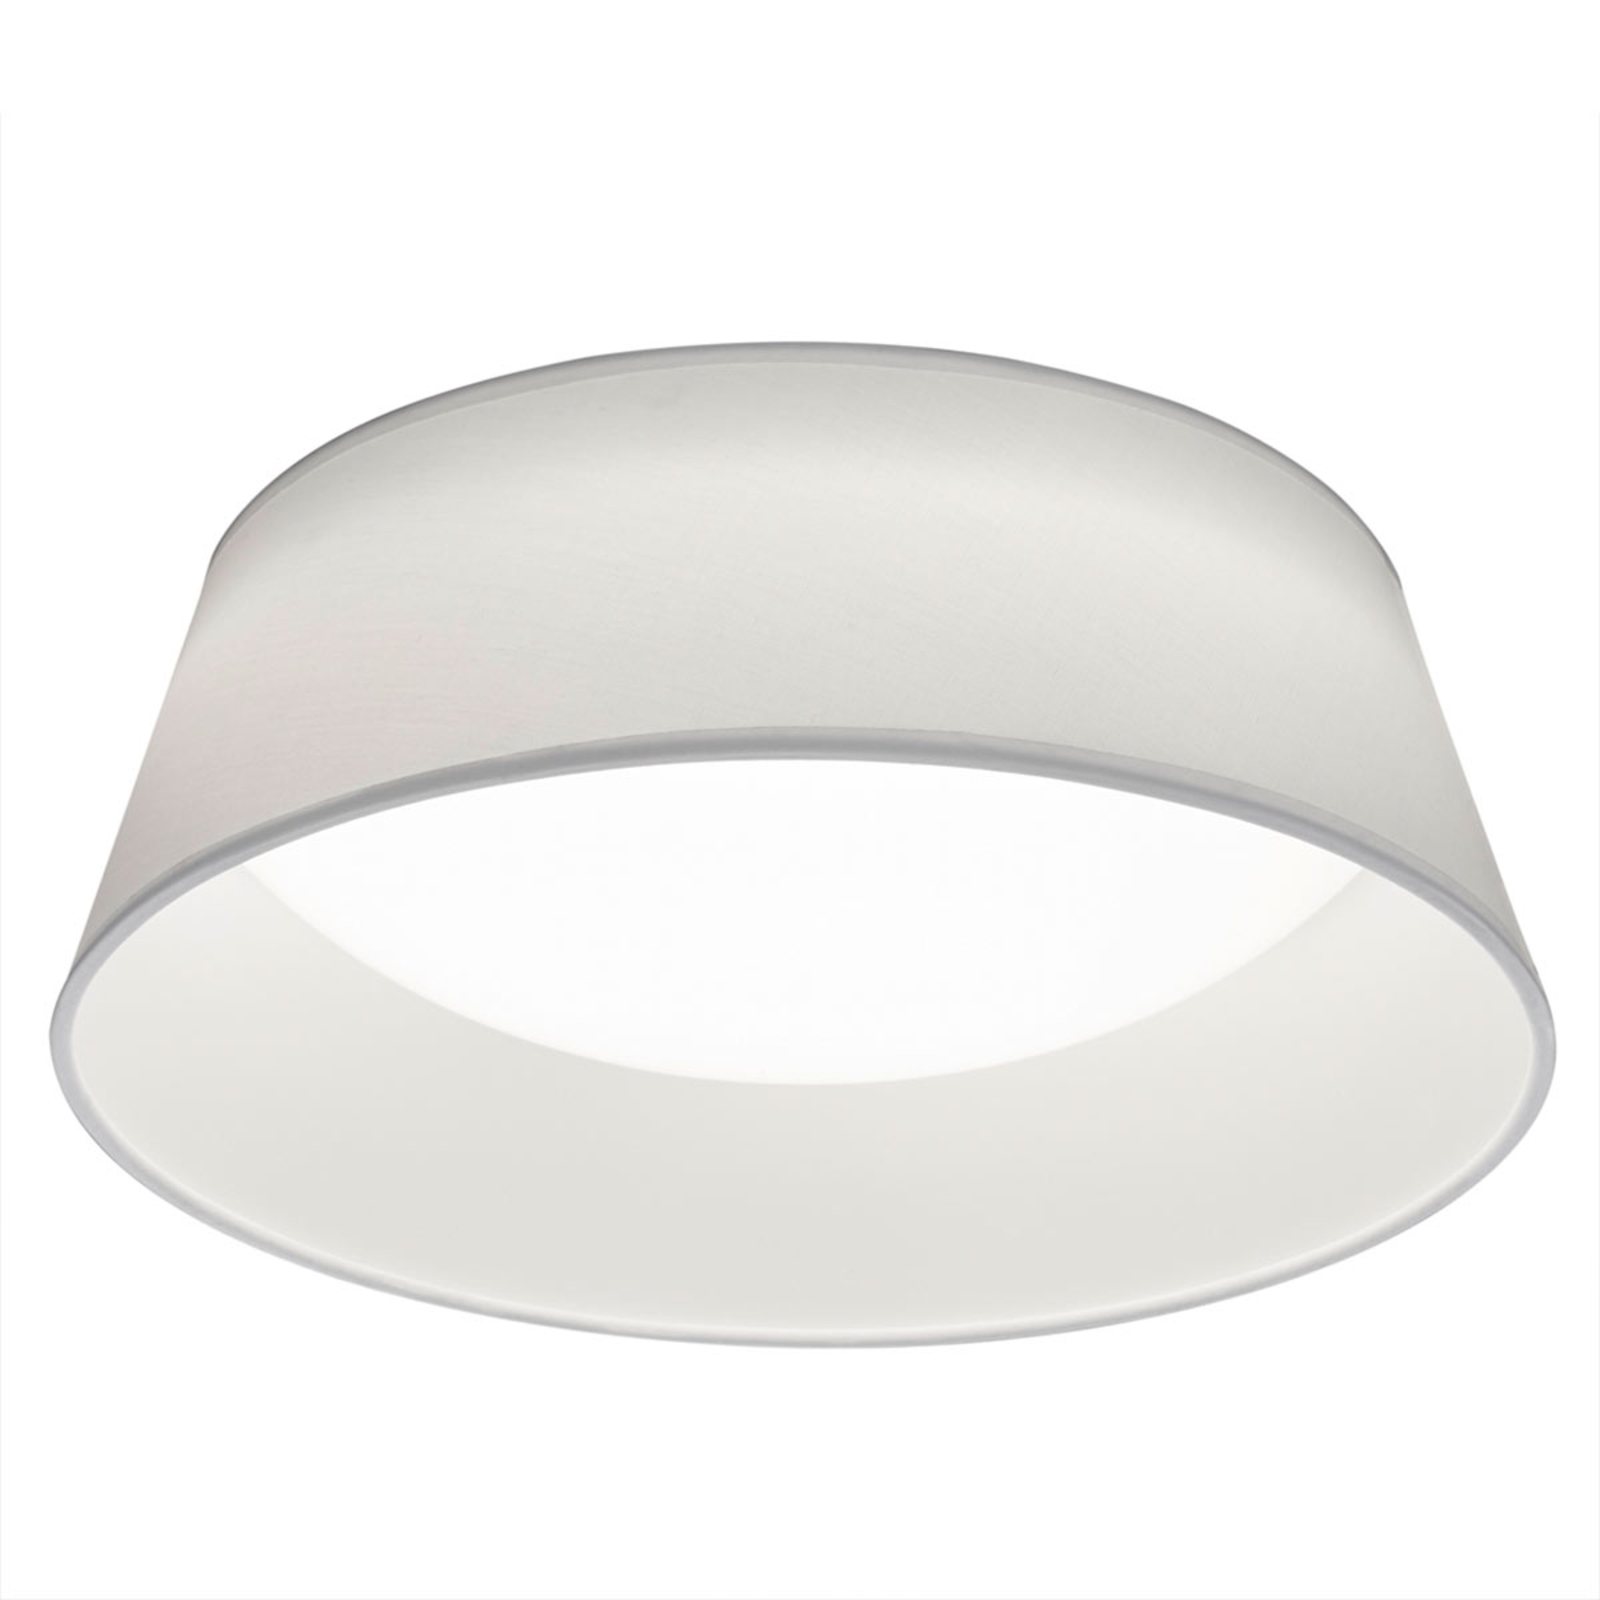 White Ponts fabric ceiling light with LEDs